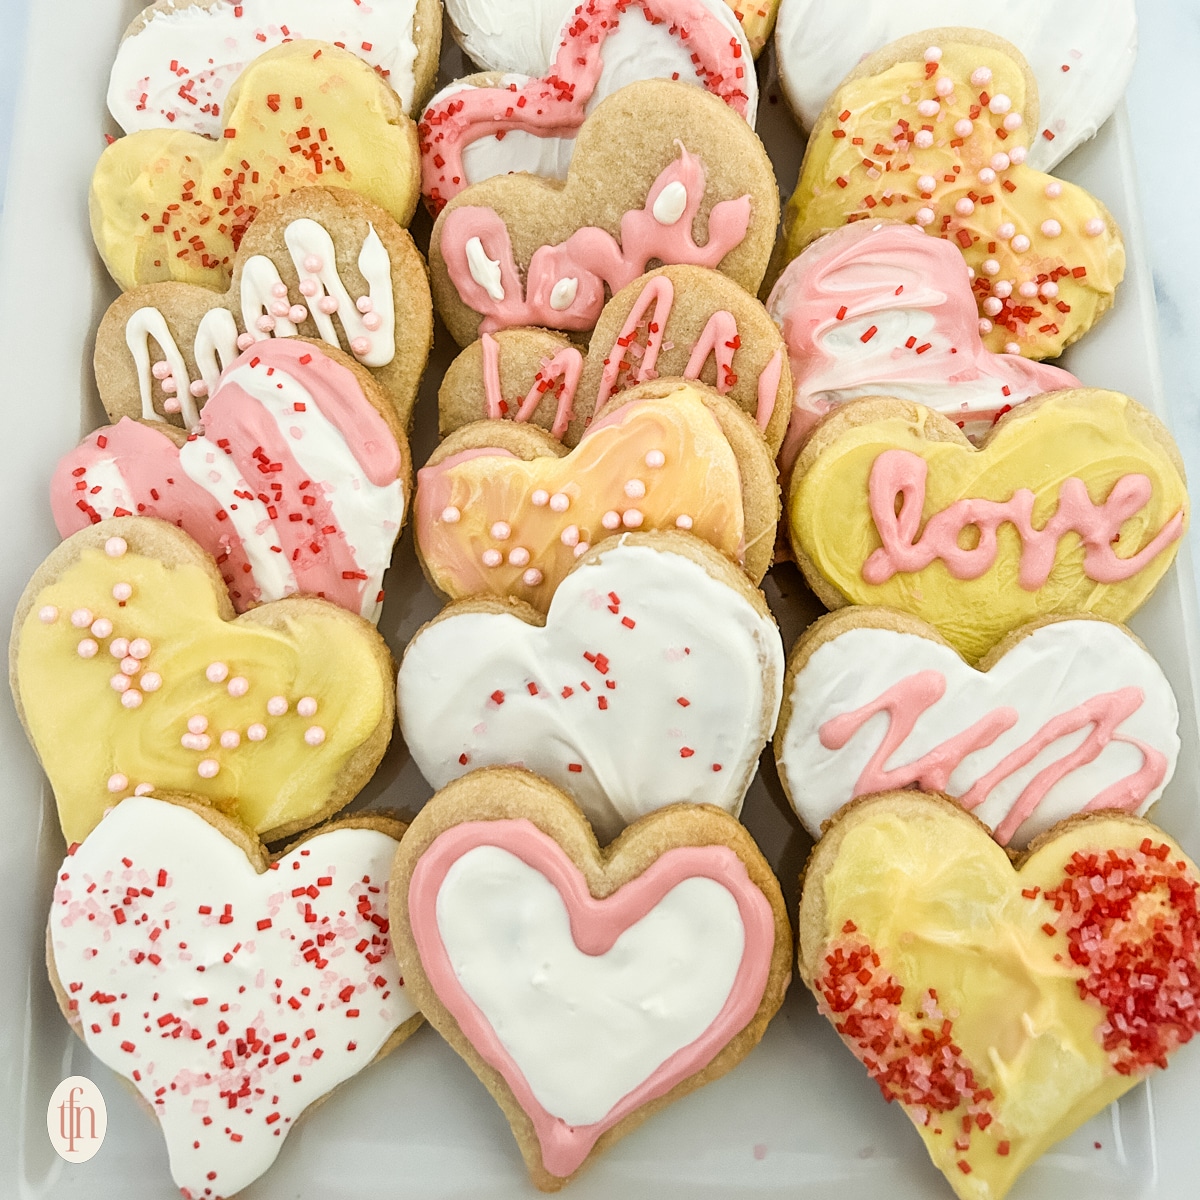 Heart sugar cookies on a white plate.